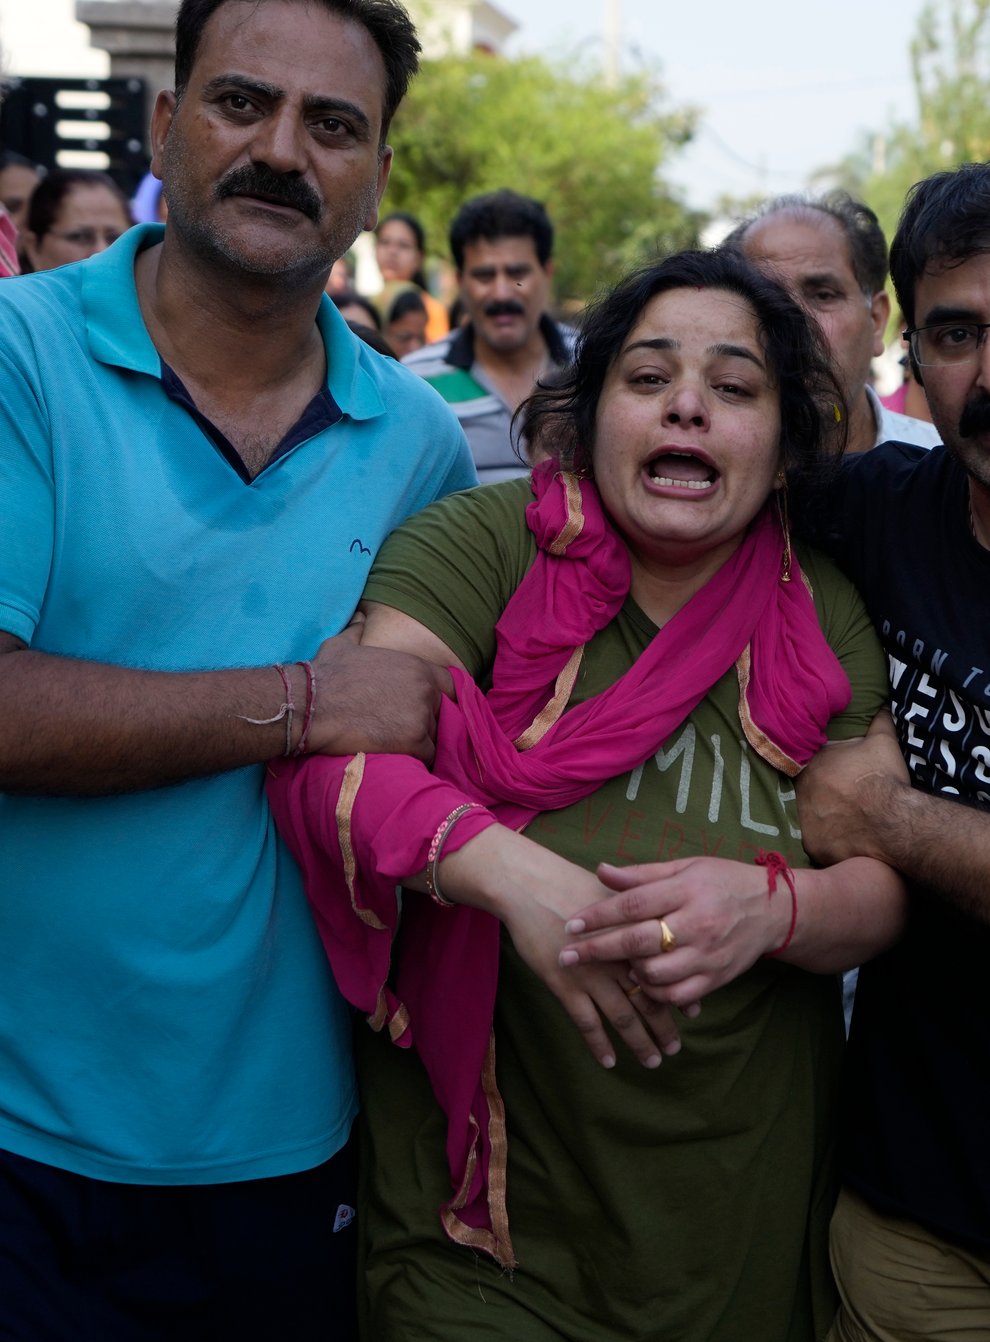 Meenakshi mourns during the cremation of her husaband Rahul Bhat, a government employee killed on Thursday, in Jammu, India (Channi Anand/AP)